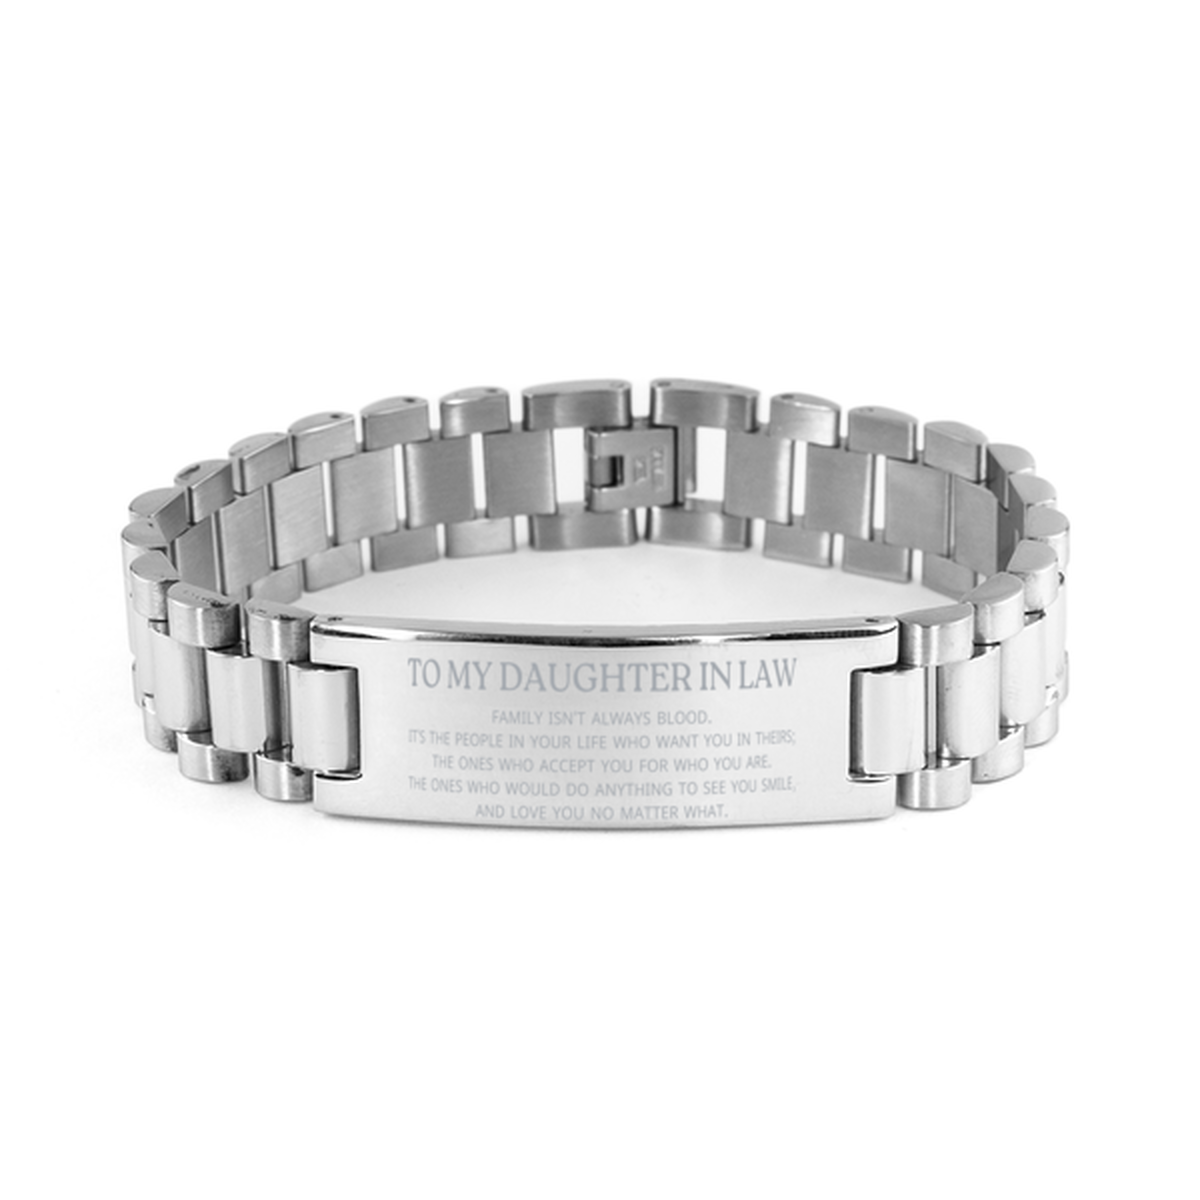 To My Daughter In Law Gifts, Family isn't always blood, Daughter In Law Ladder Stainless Steel Bracelet, Birthday Christmas Unique Present For Daughter In Law